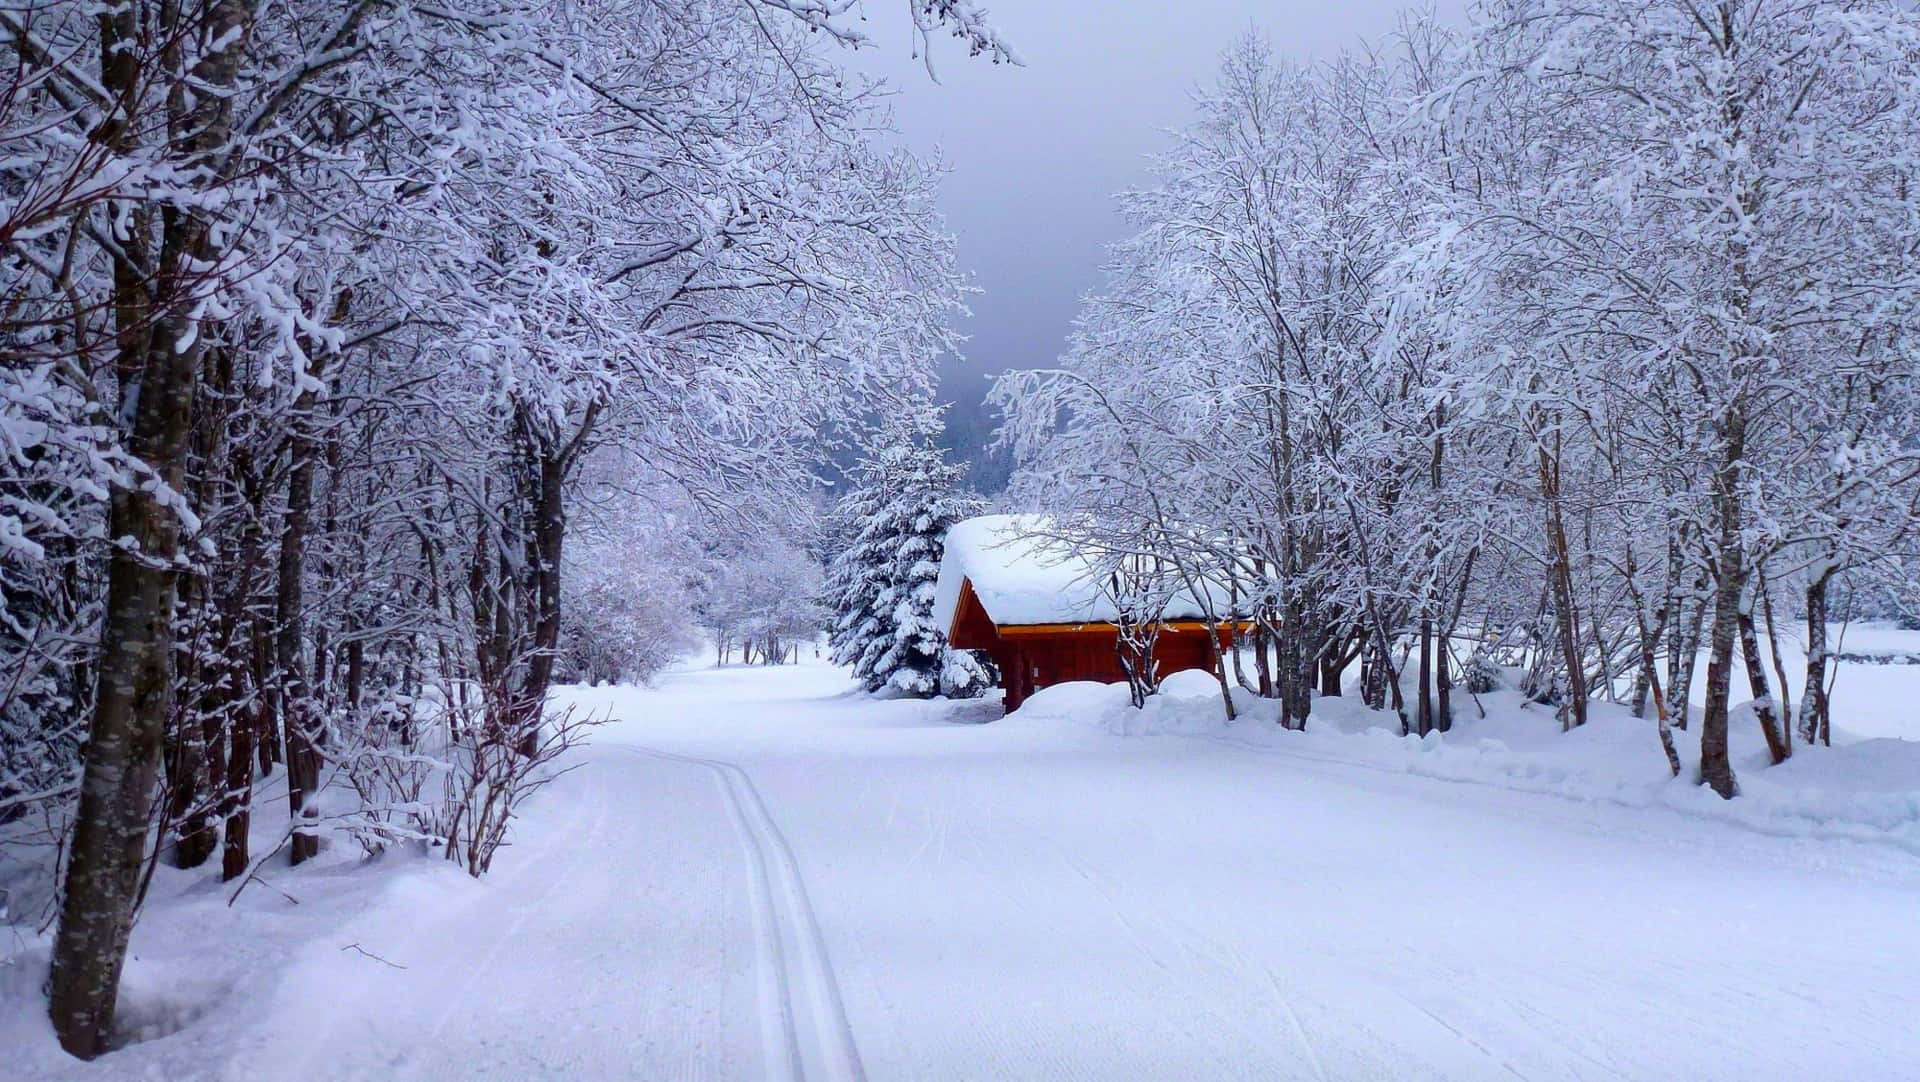 Take in the beauty of a majestic, Winter Wonderland